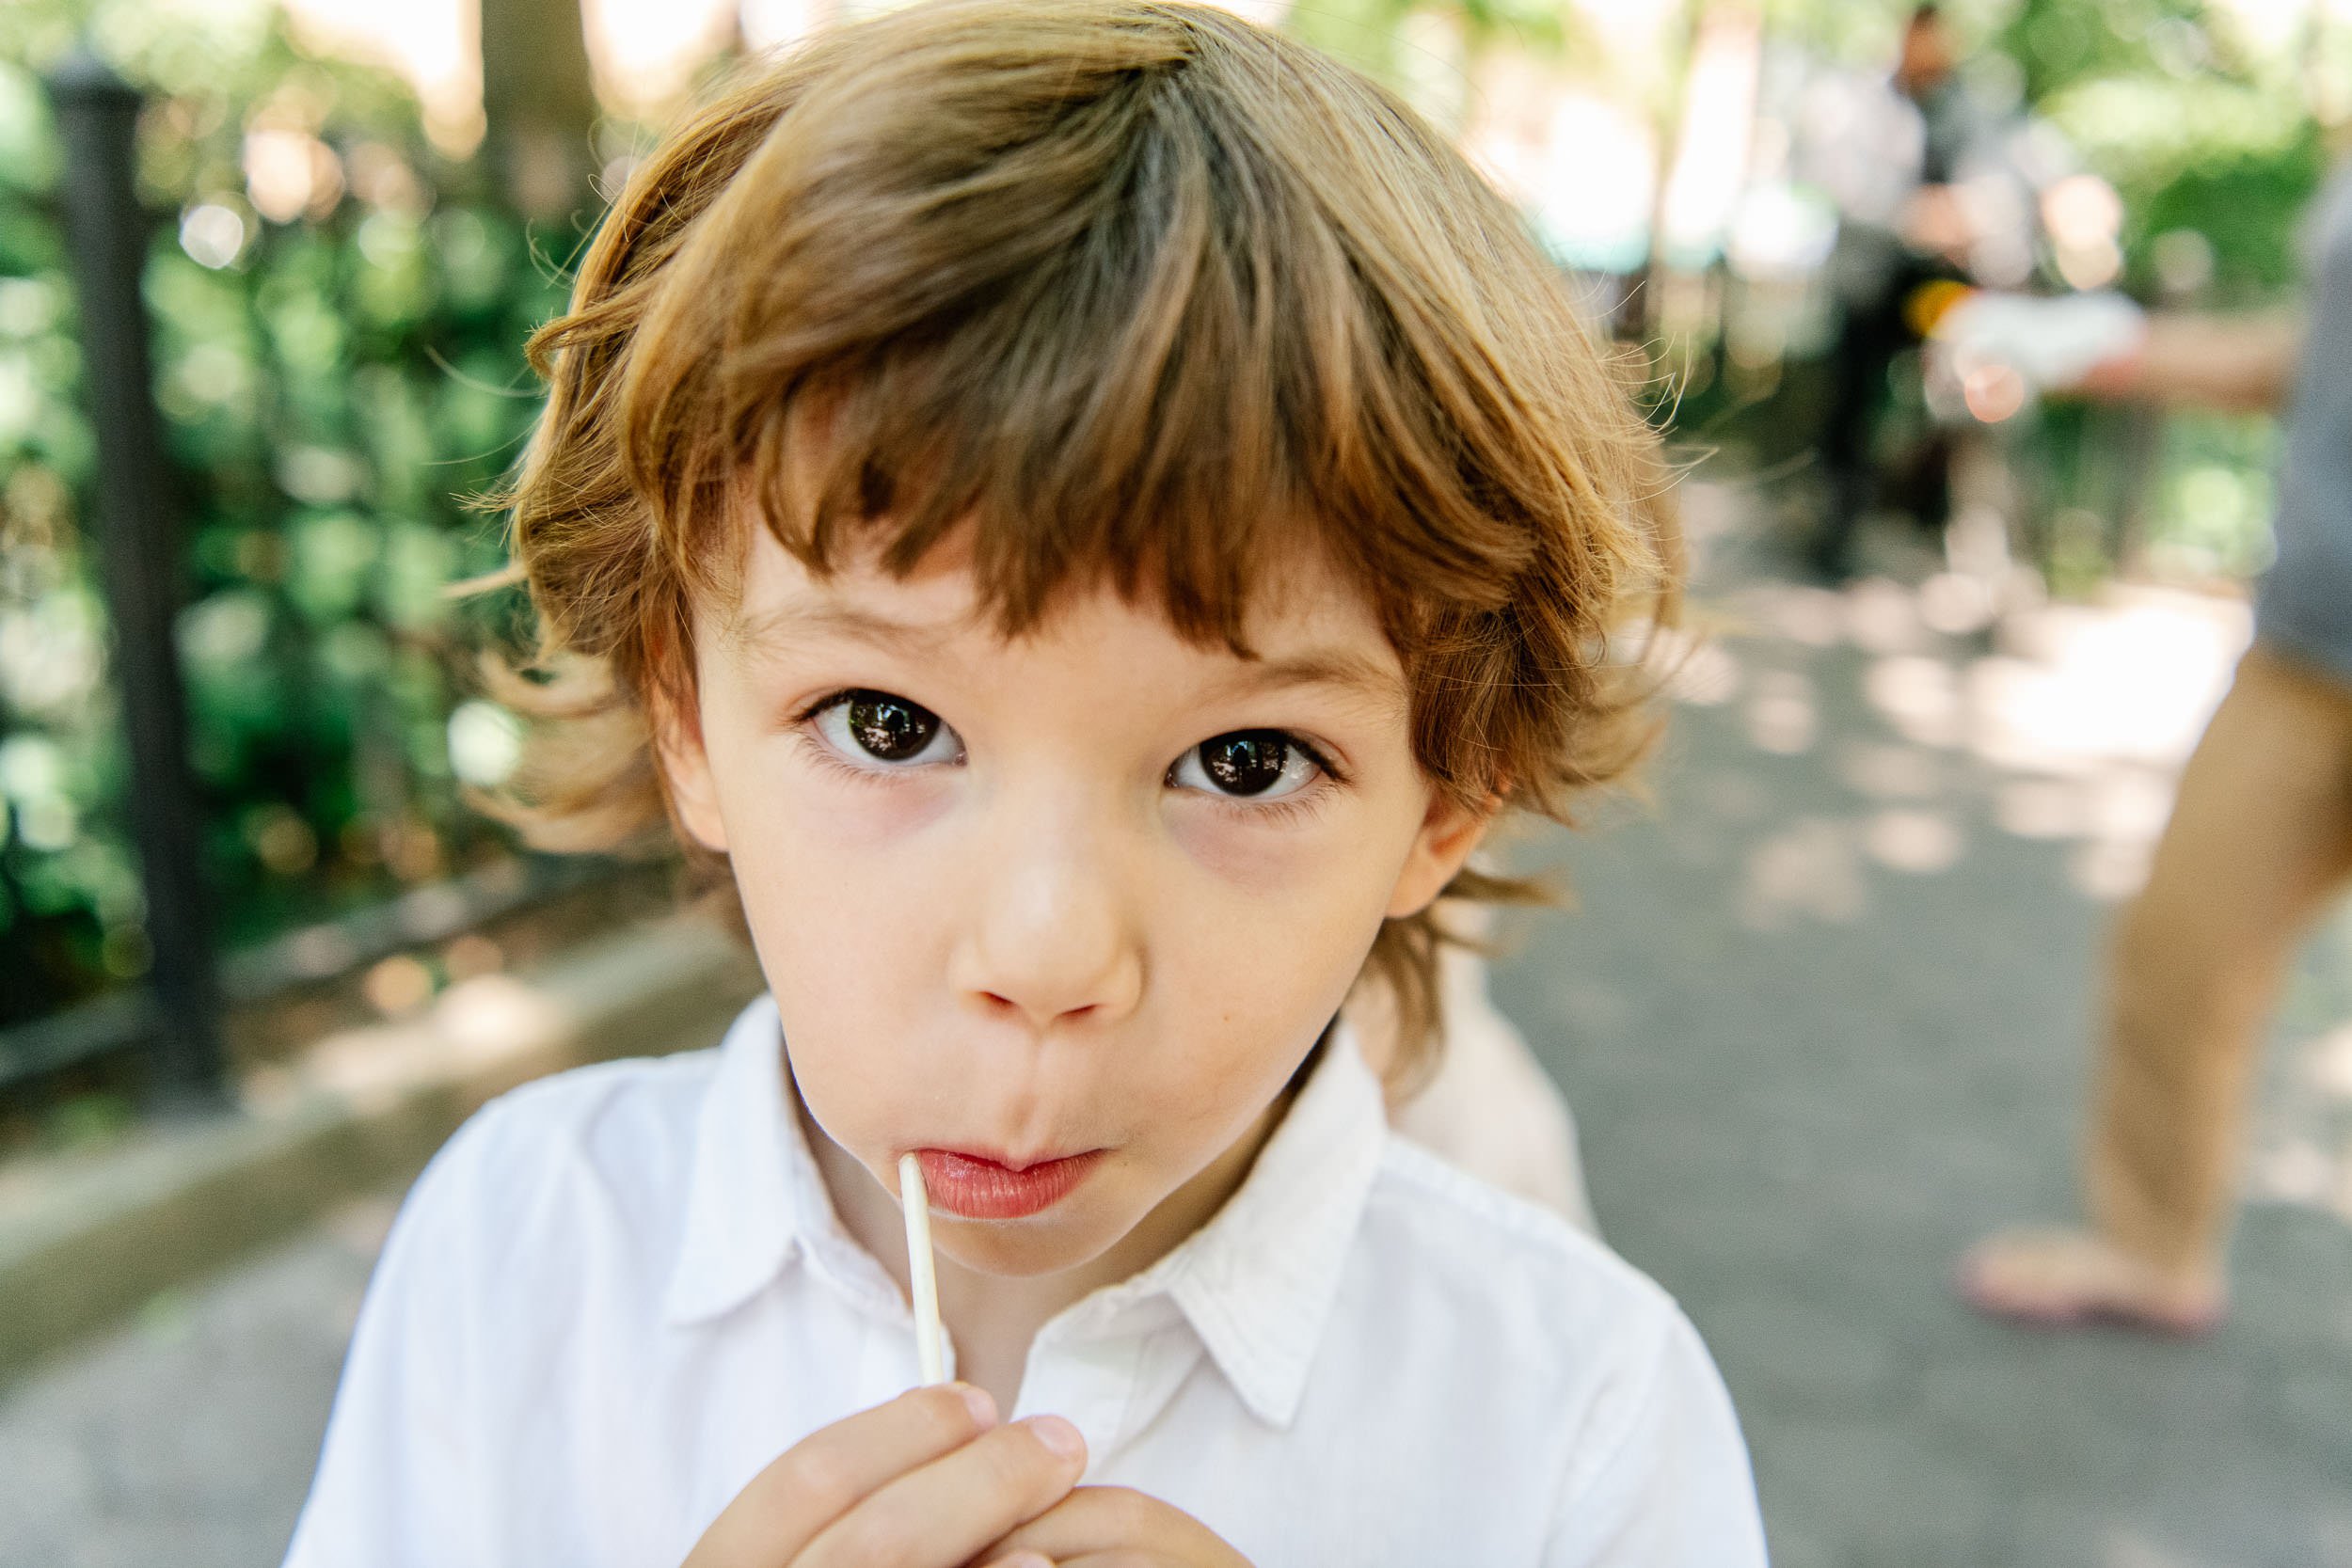  Nicole Hawkins Photography captures a face portrait of a little boy eating a sucker in NYC. NYC family pictures #NicoleHawkinsPhotograaphy #NicoleHawkinsChildren #NewYorkPortraits #KidsinNewYork #ChildrensPortraits #lifestyleportraits 